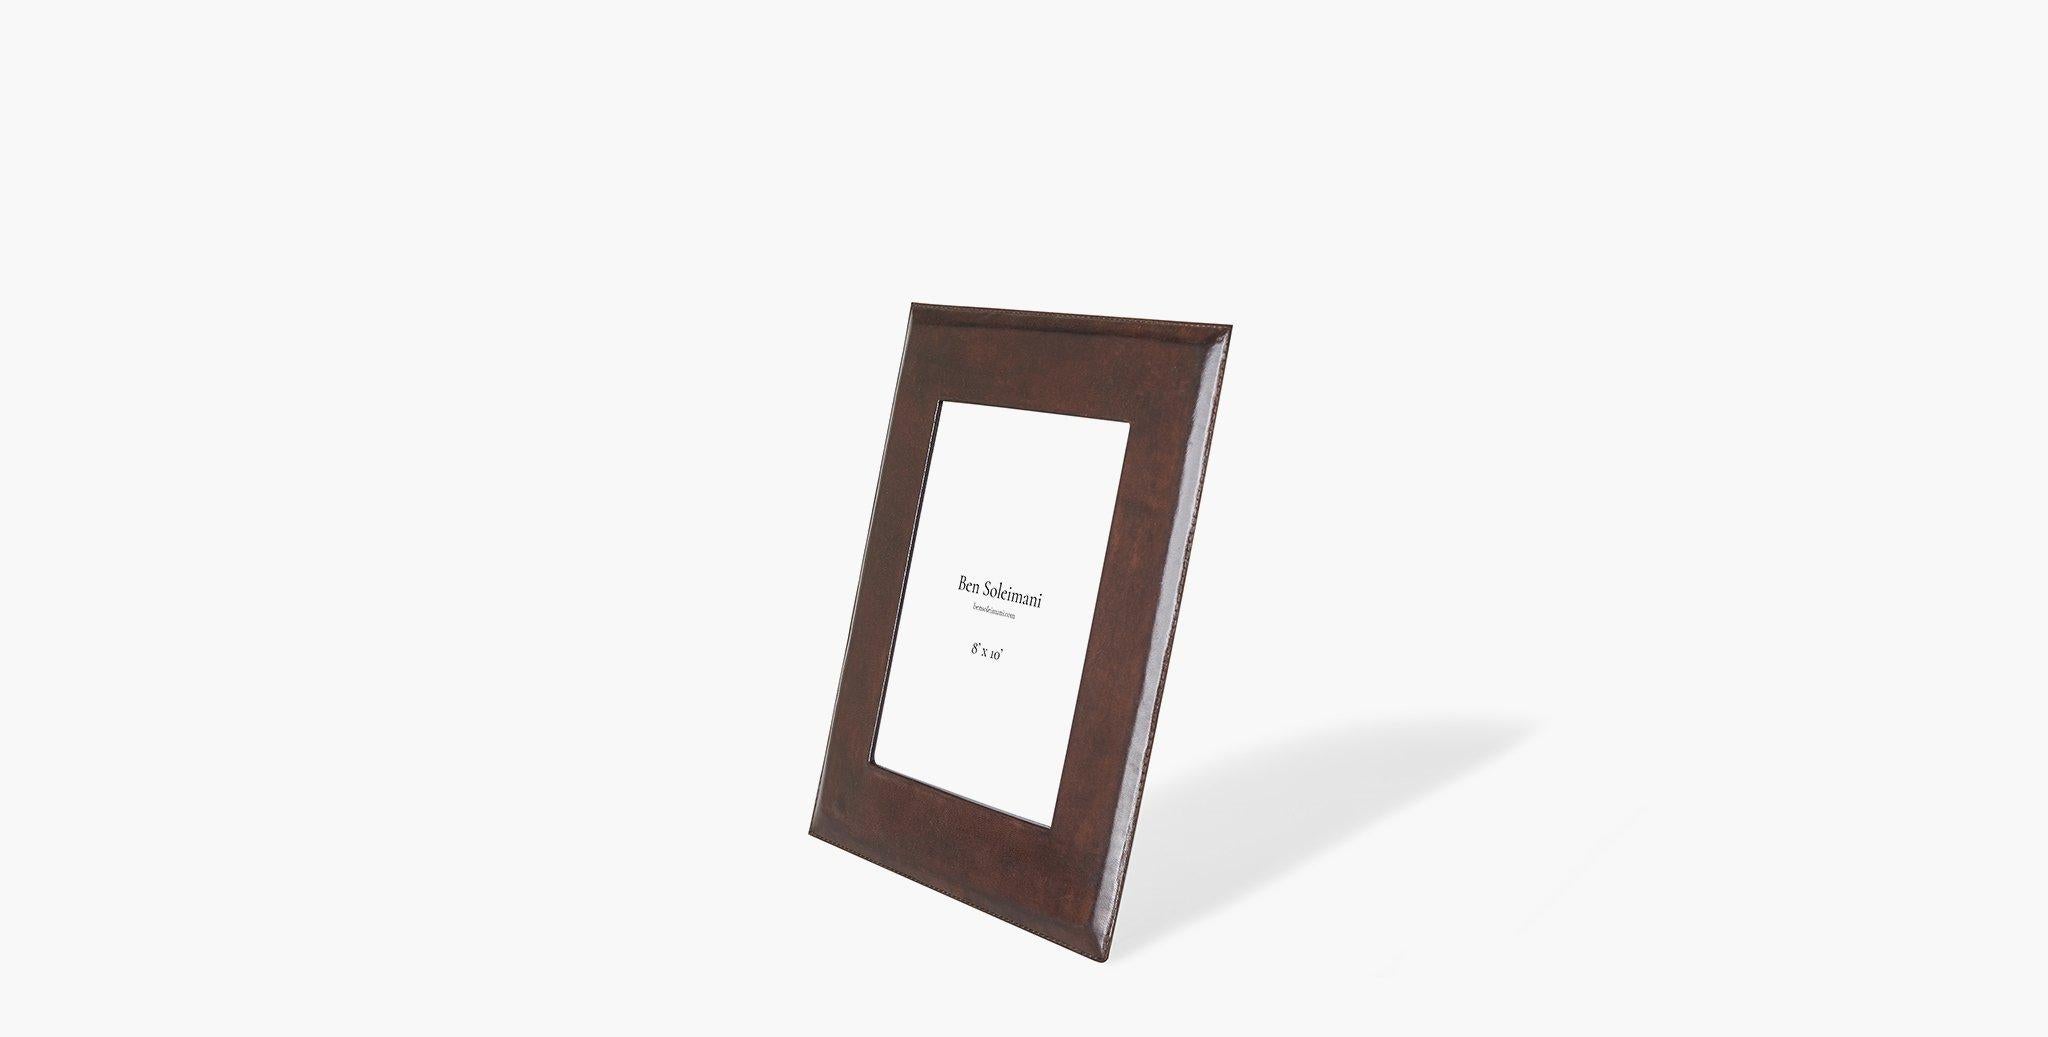 Our Pluma Leather Picture Frame is crafted in rich leather with a glass inset, providing a classic piece for your family memories. Our handcrafted fabrics, leathers, and finishes are inspired by the natural variations within fibers, textures, and